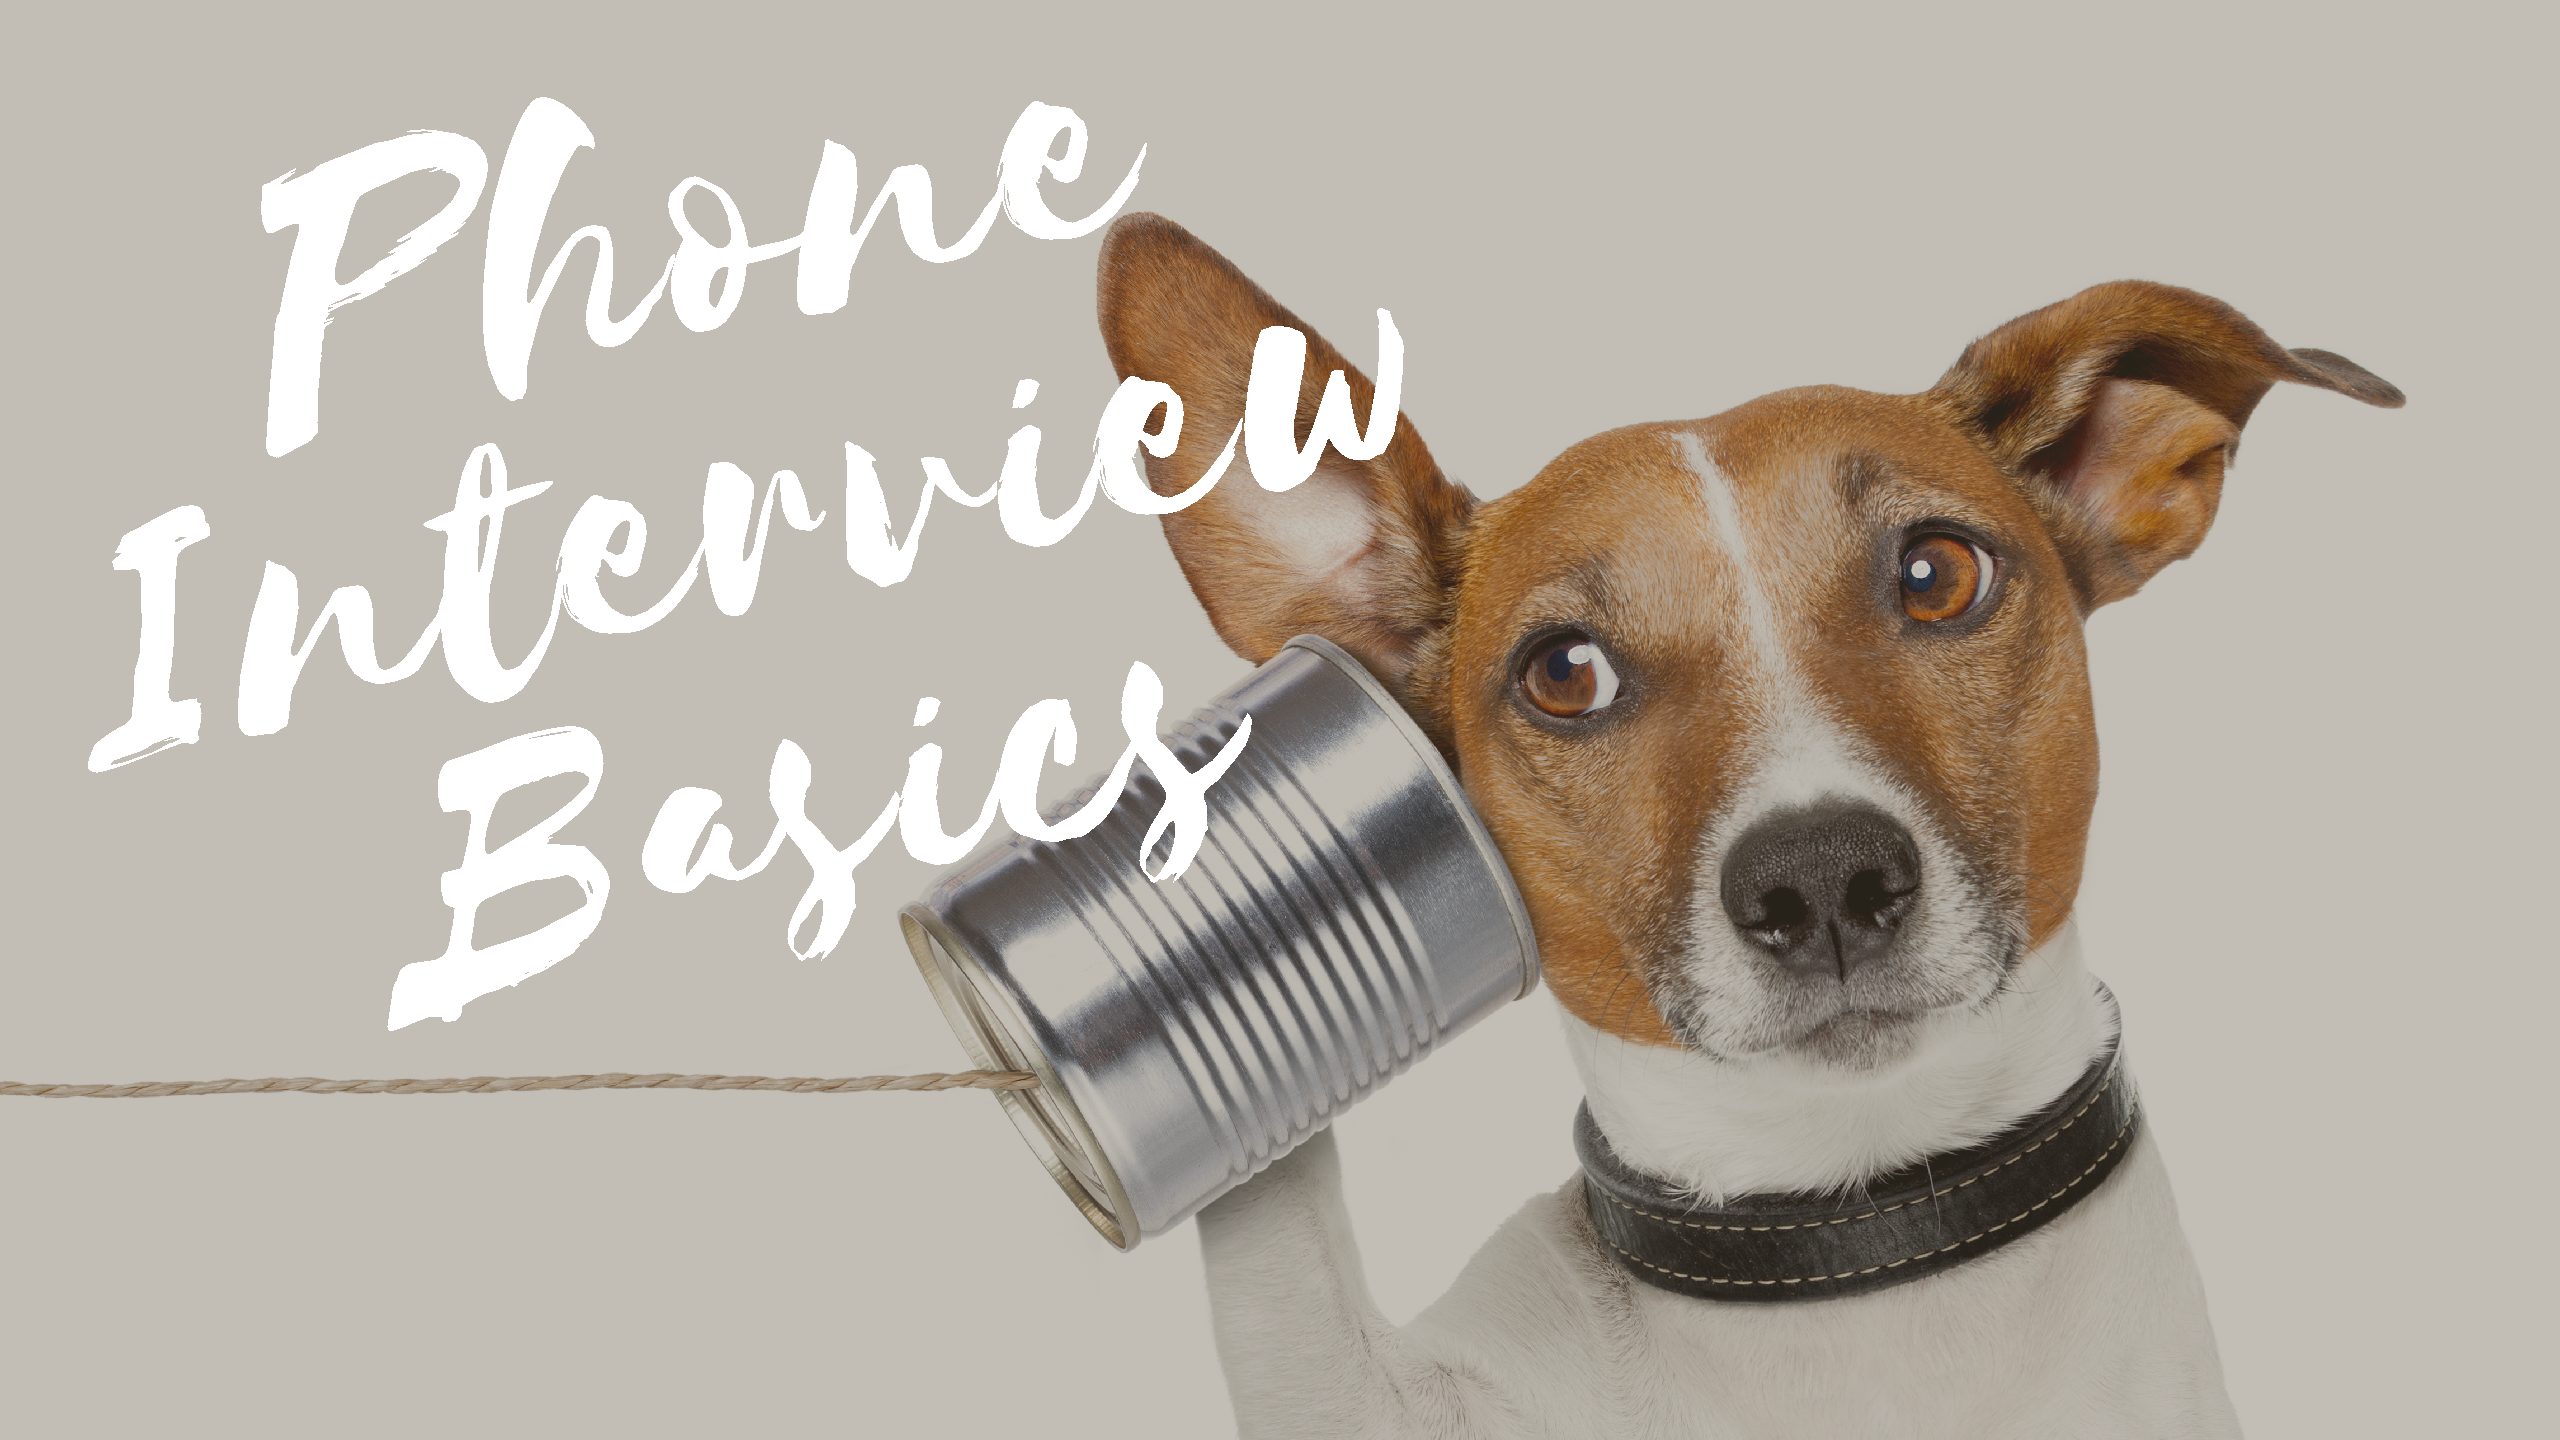 The Initial Phone Interview –  Success Basics